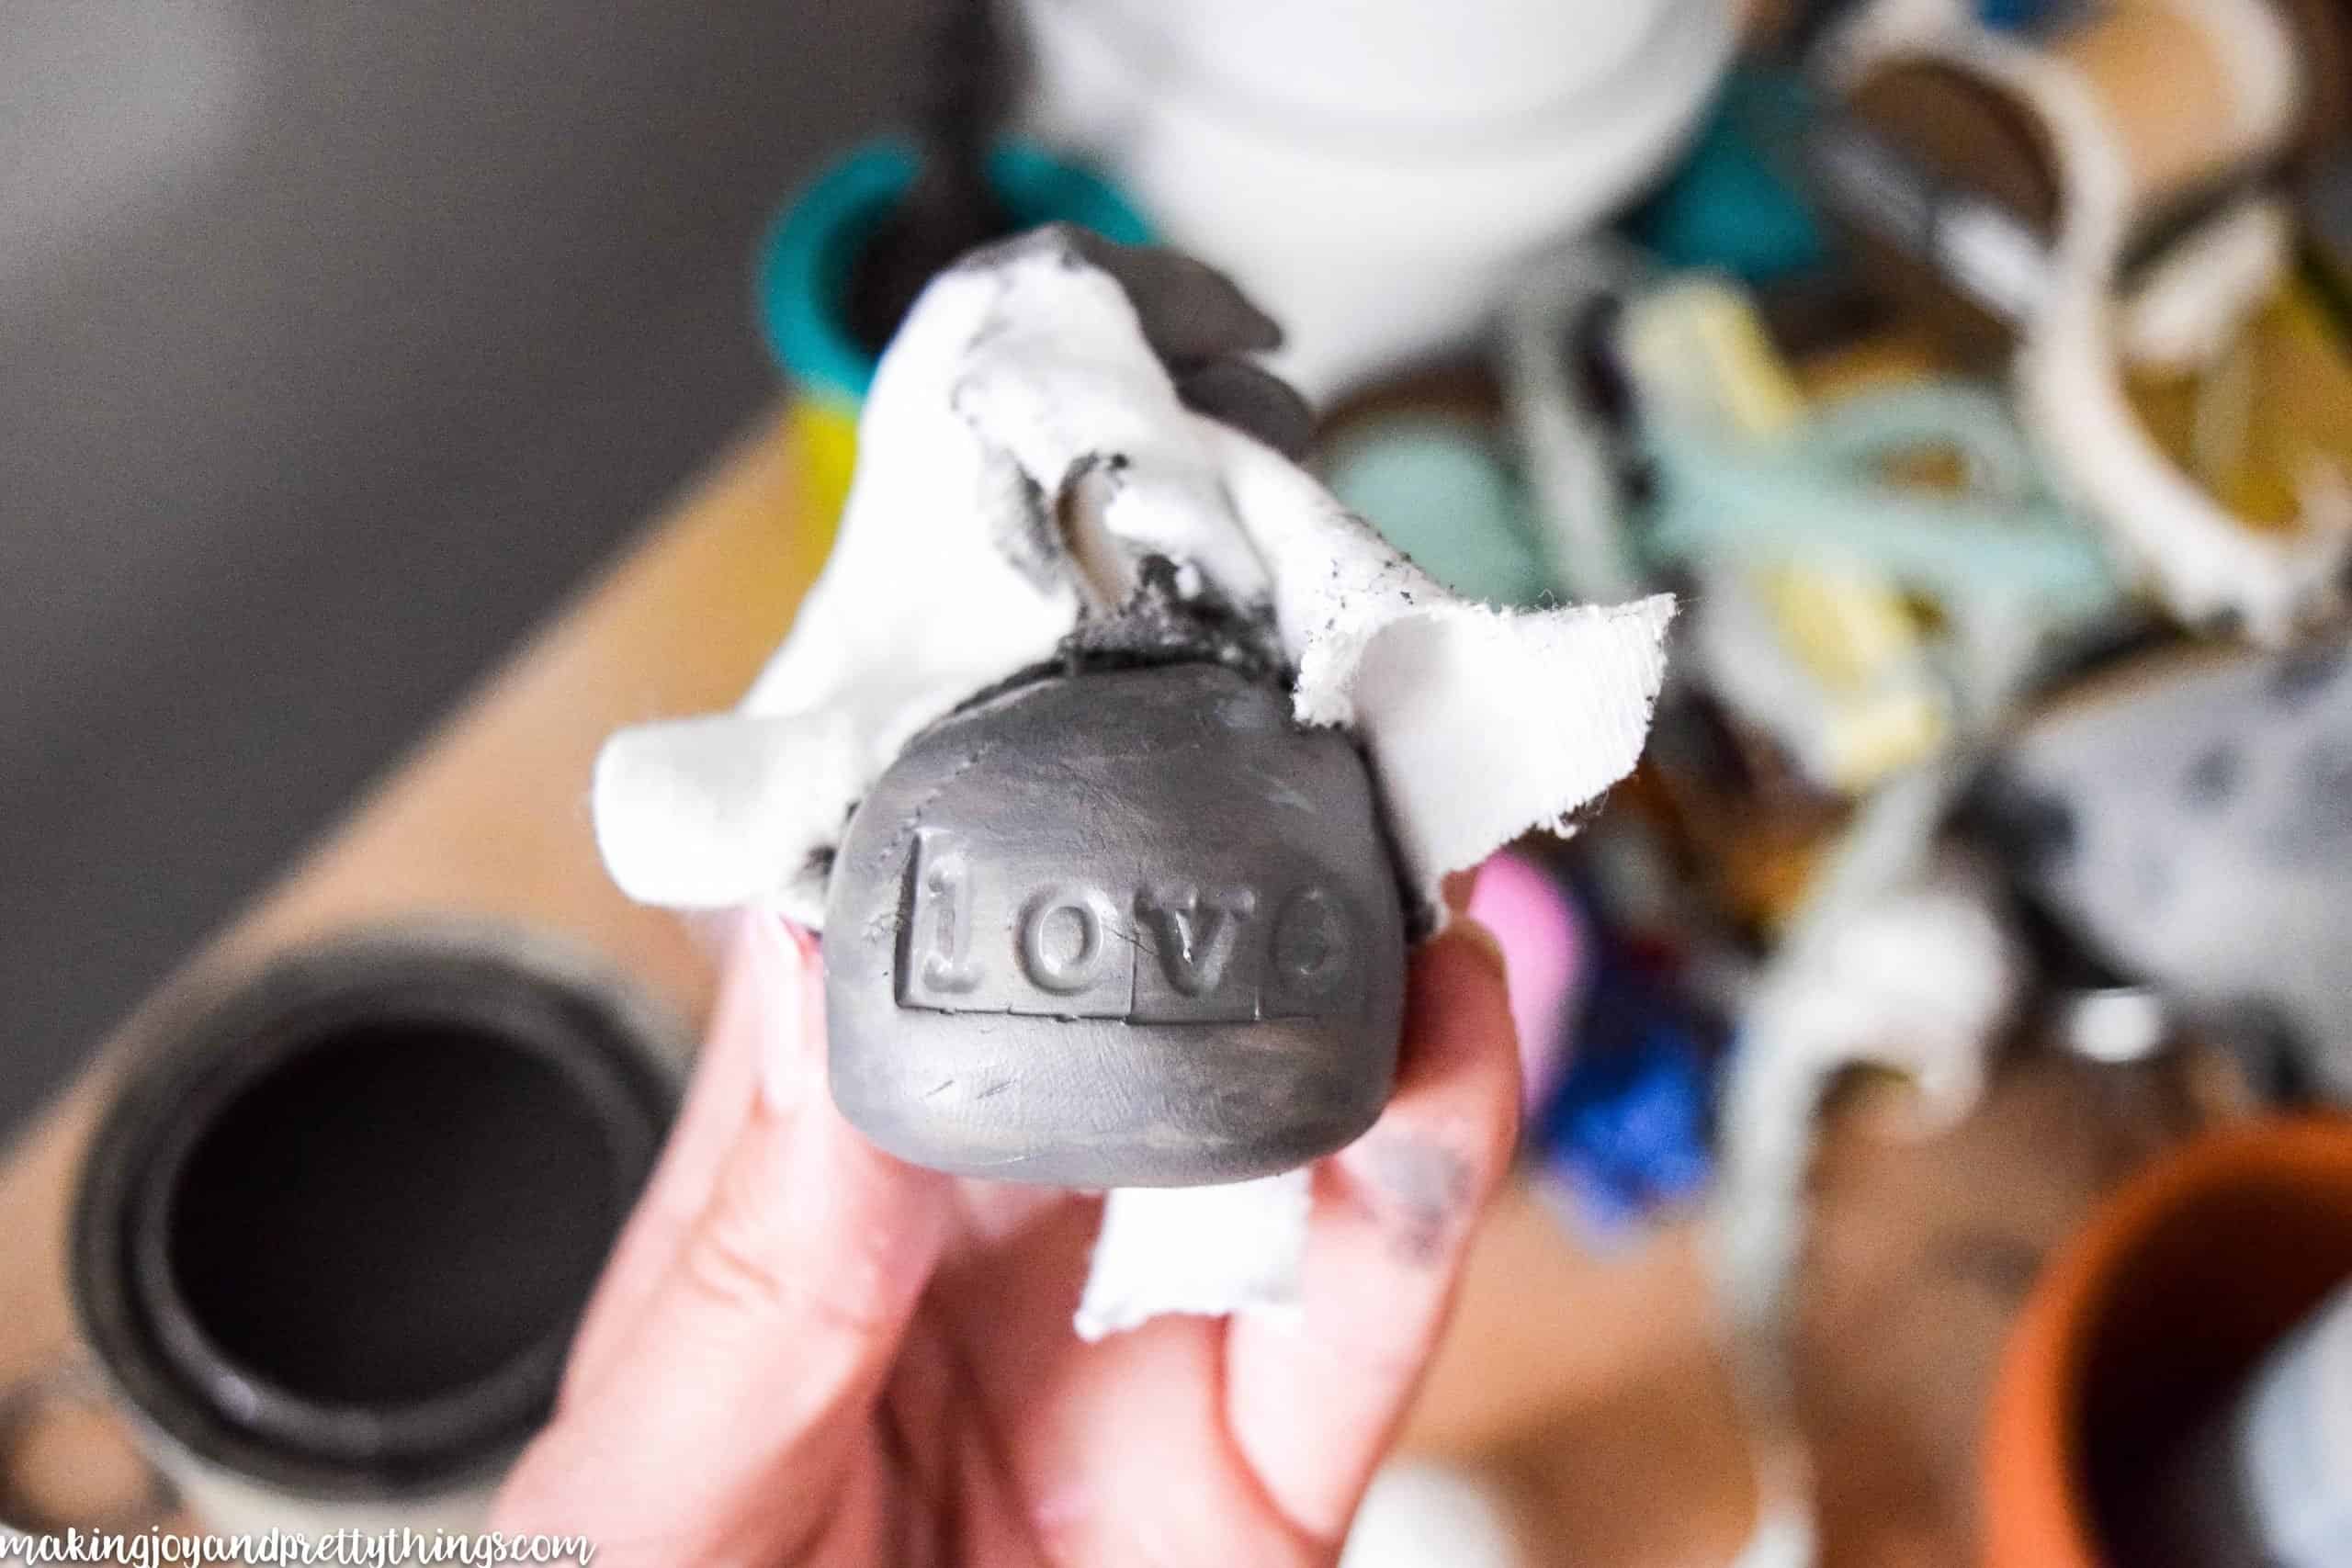 This is a baked clay base for a DIY wire photo holder that has been painted grey and distressed 